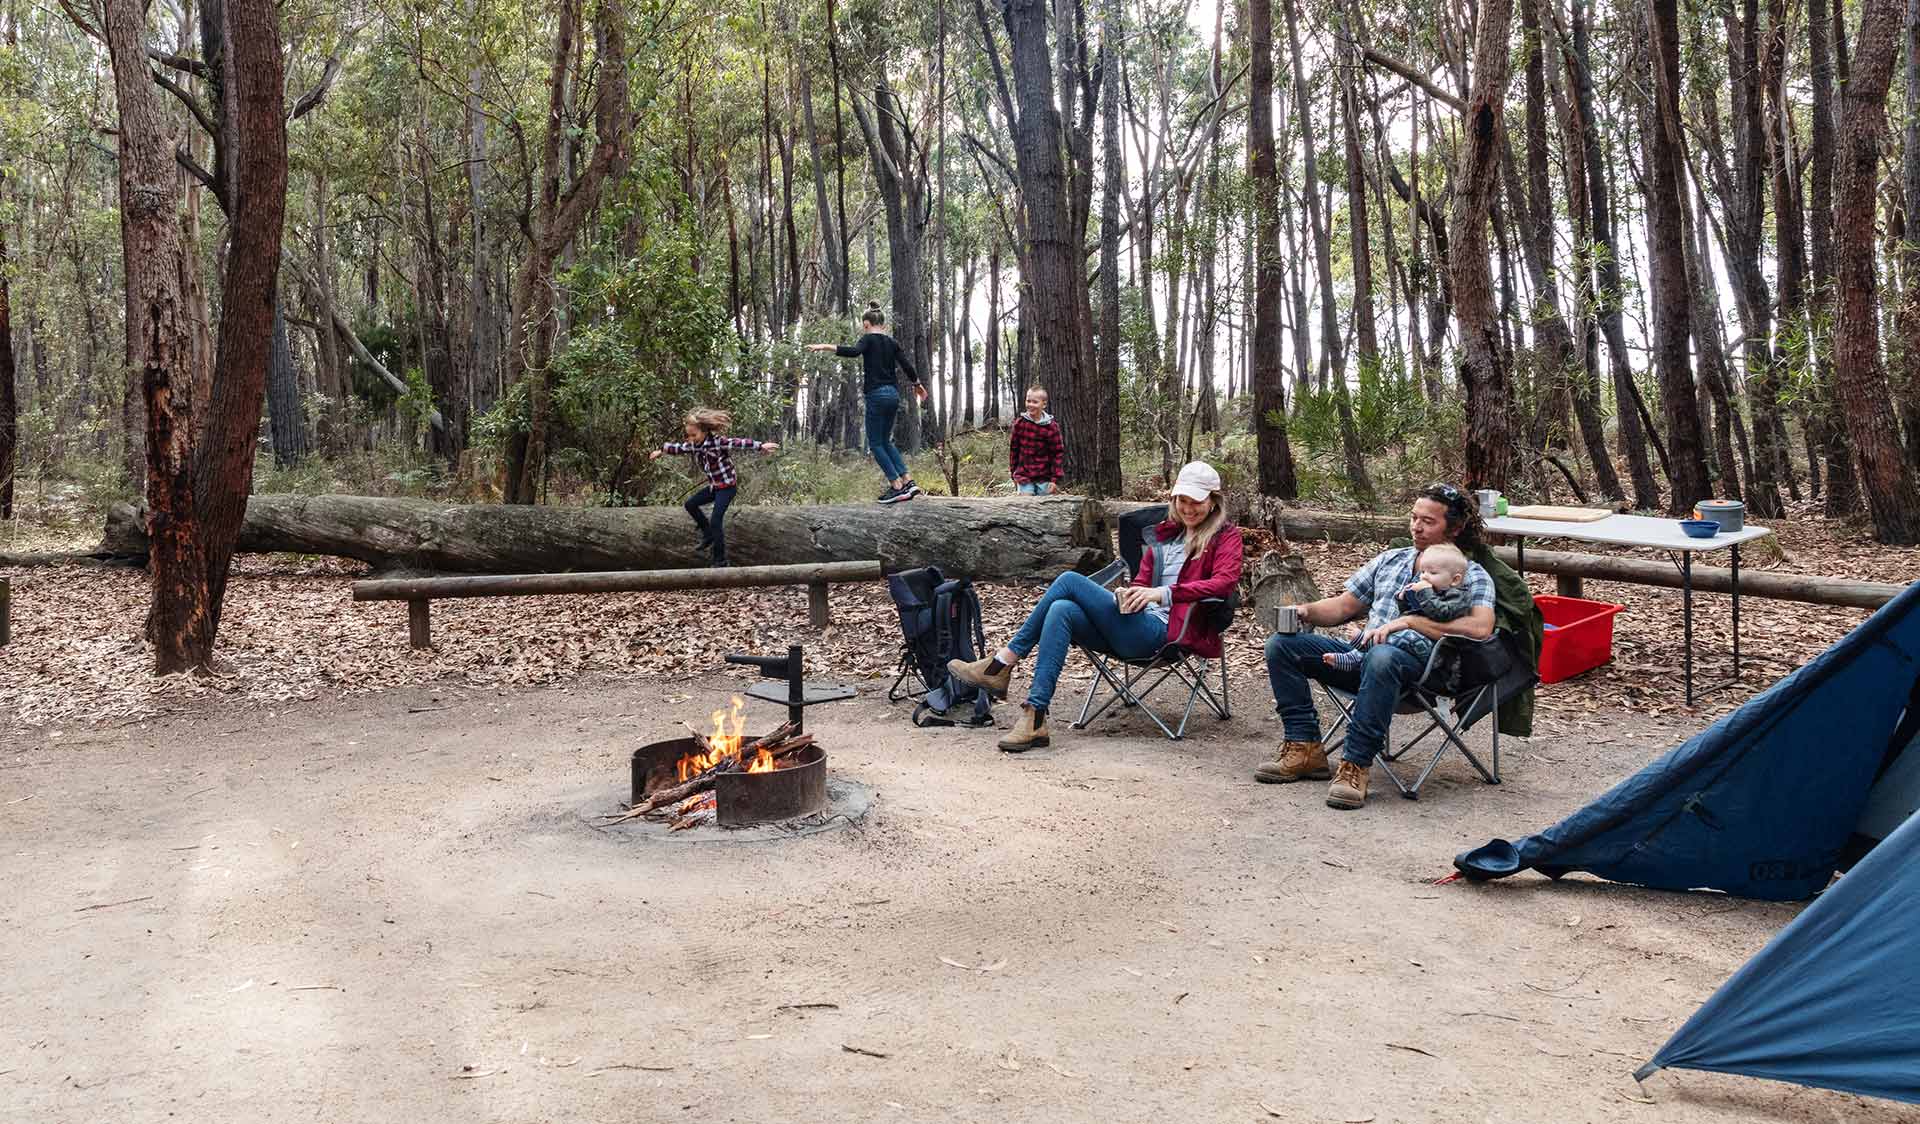 Mum and Dad sit around the campfire with their infant son while their three other children play in the background.